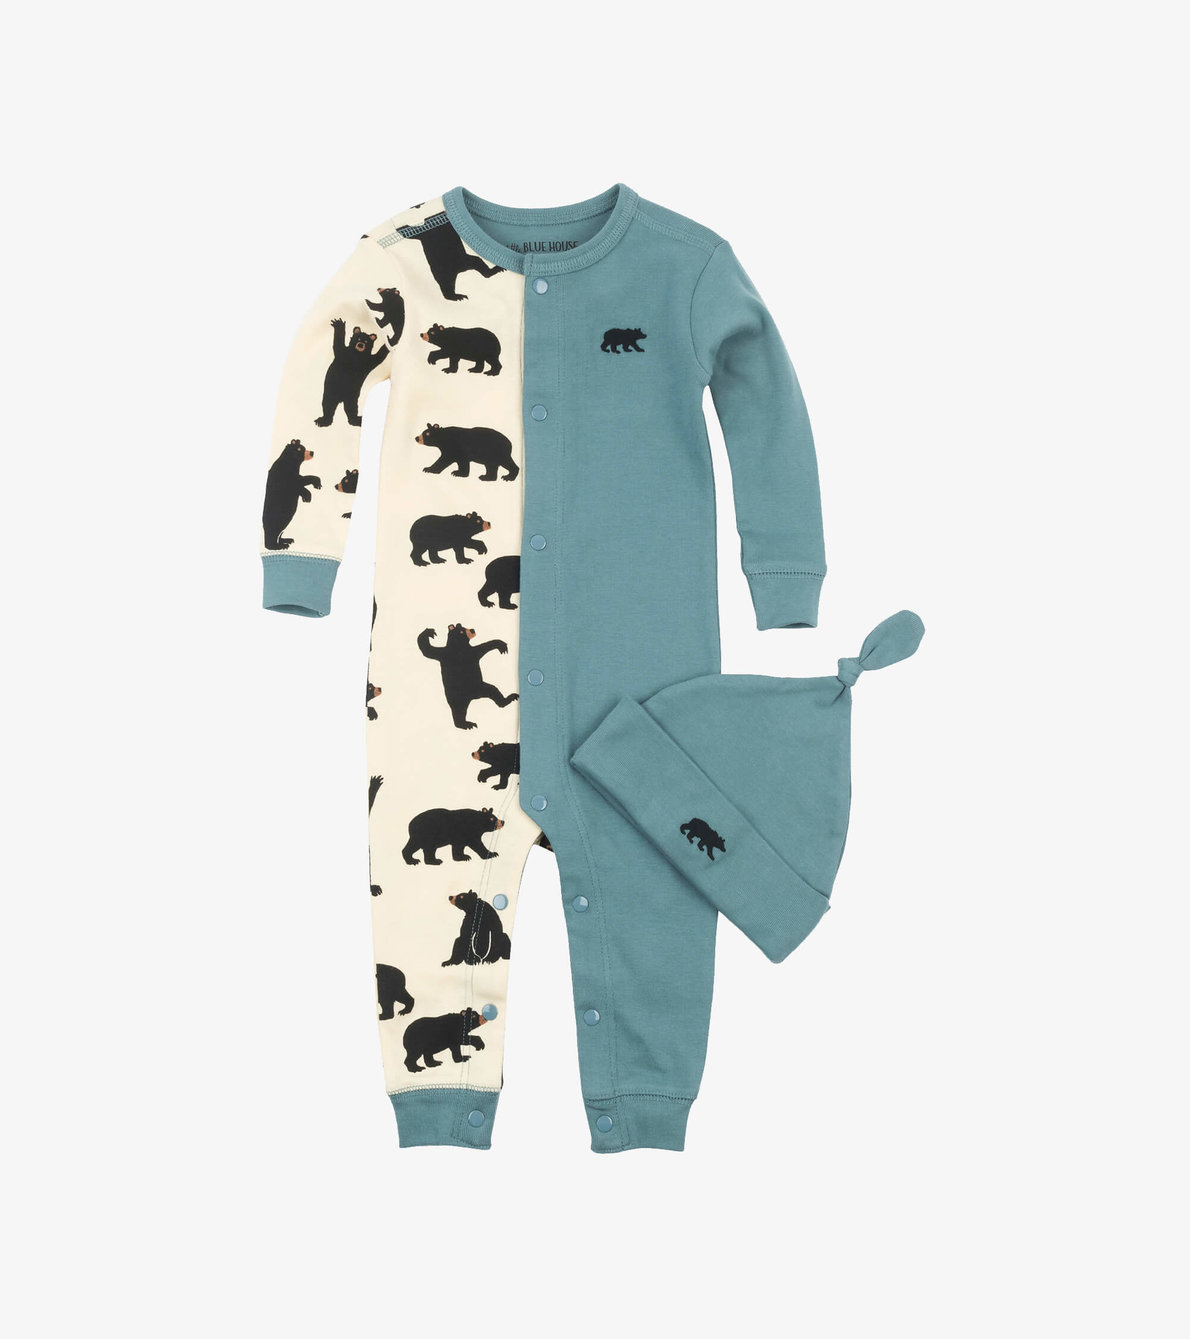 View larger image of Teal & Black Bear Baby Coverall with Hat